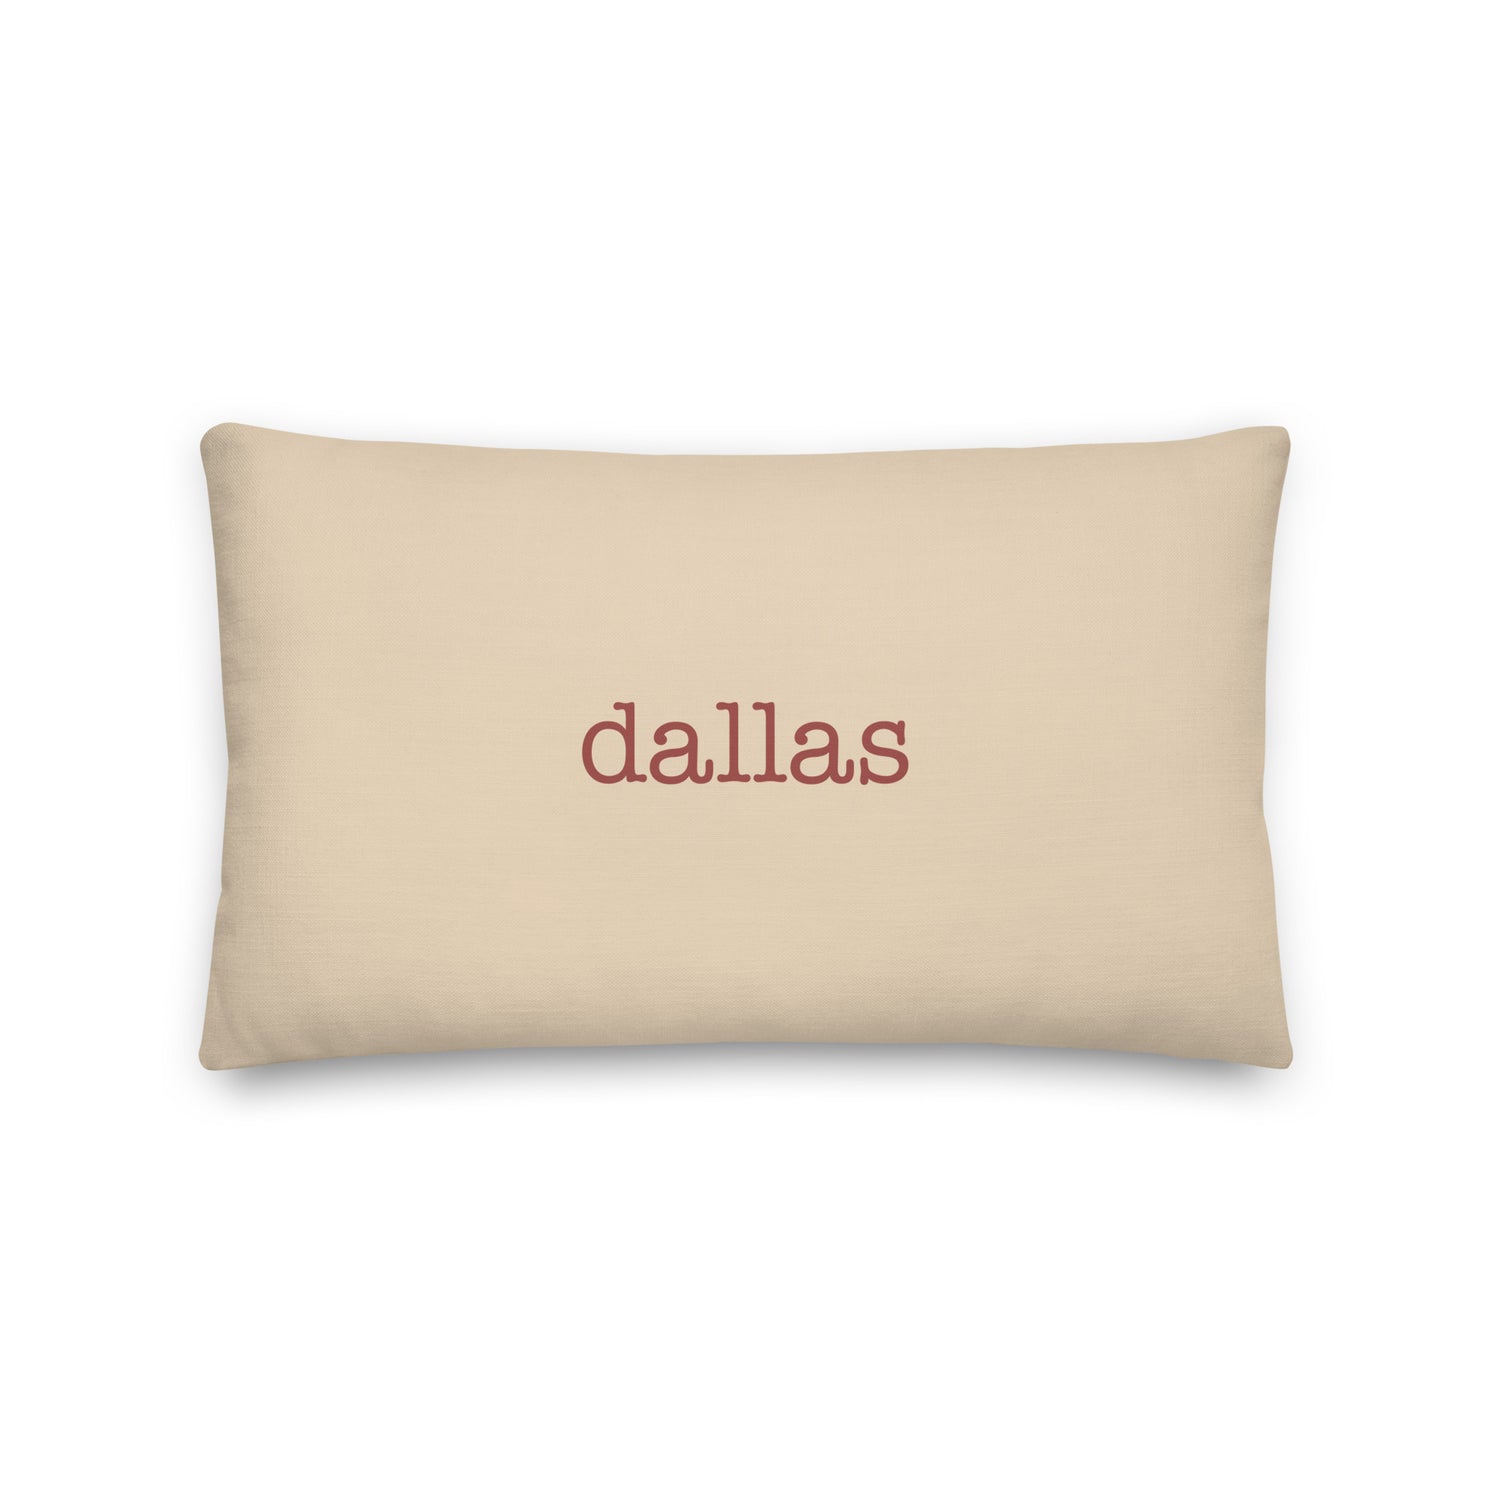 Dallas Texas Pillows and Blankets • DFW Airport Code